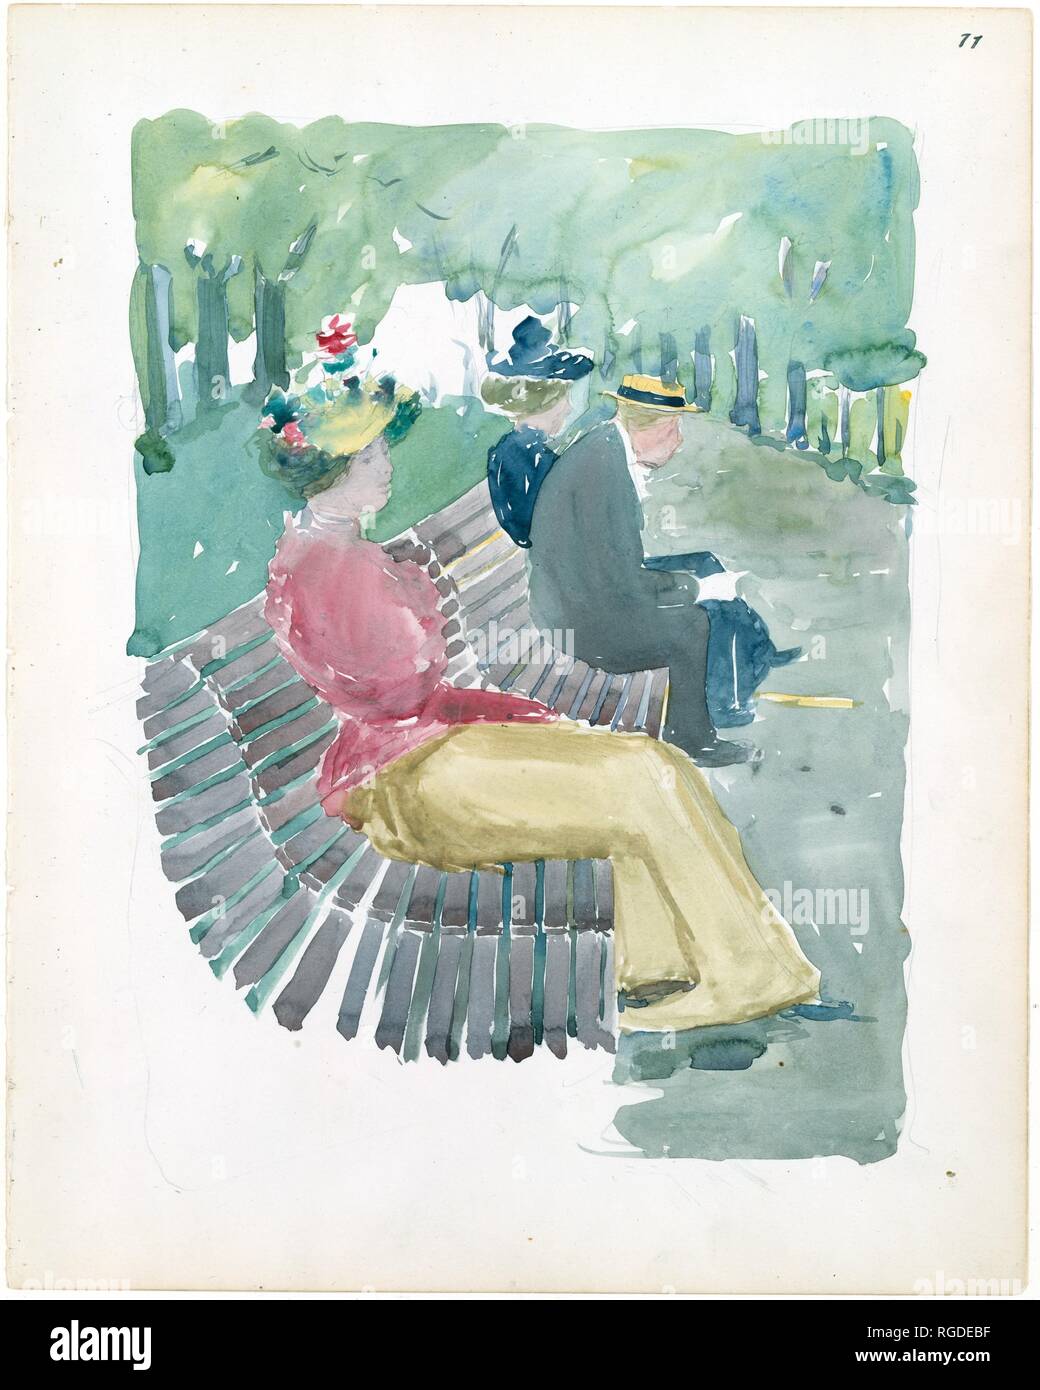 Large Boston Public Garden Sketchbook: A man and two women sitting in the park. Artist: Maurice Brazil Prendergast  (American, St. John's, Newfoundland 1858-1924 New York). Dimensions: 14 1/8 x 11 3/16 in.  (35.8 x 28.4 cm). Date: 1895-97.  Prendergast's expression of mood through posture and countenance is well demonstrated in this contemplative young woman and frail, old man. Apart from the arc of the slatted park bench, the sheet is laid out in watery blocks of blended brushwork. Museum: Metropolitan Museum of Art, New York, USA. Stock Photo